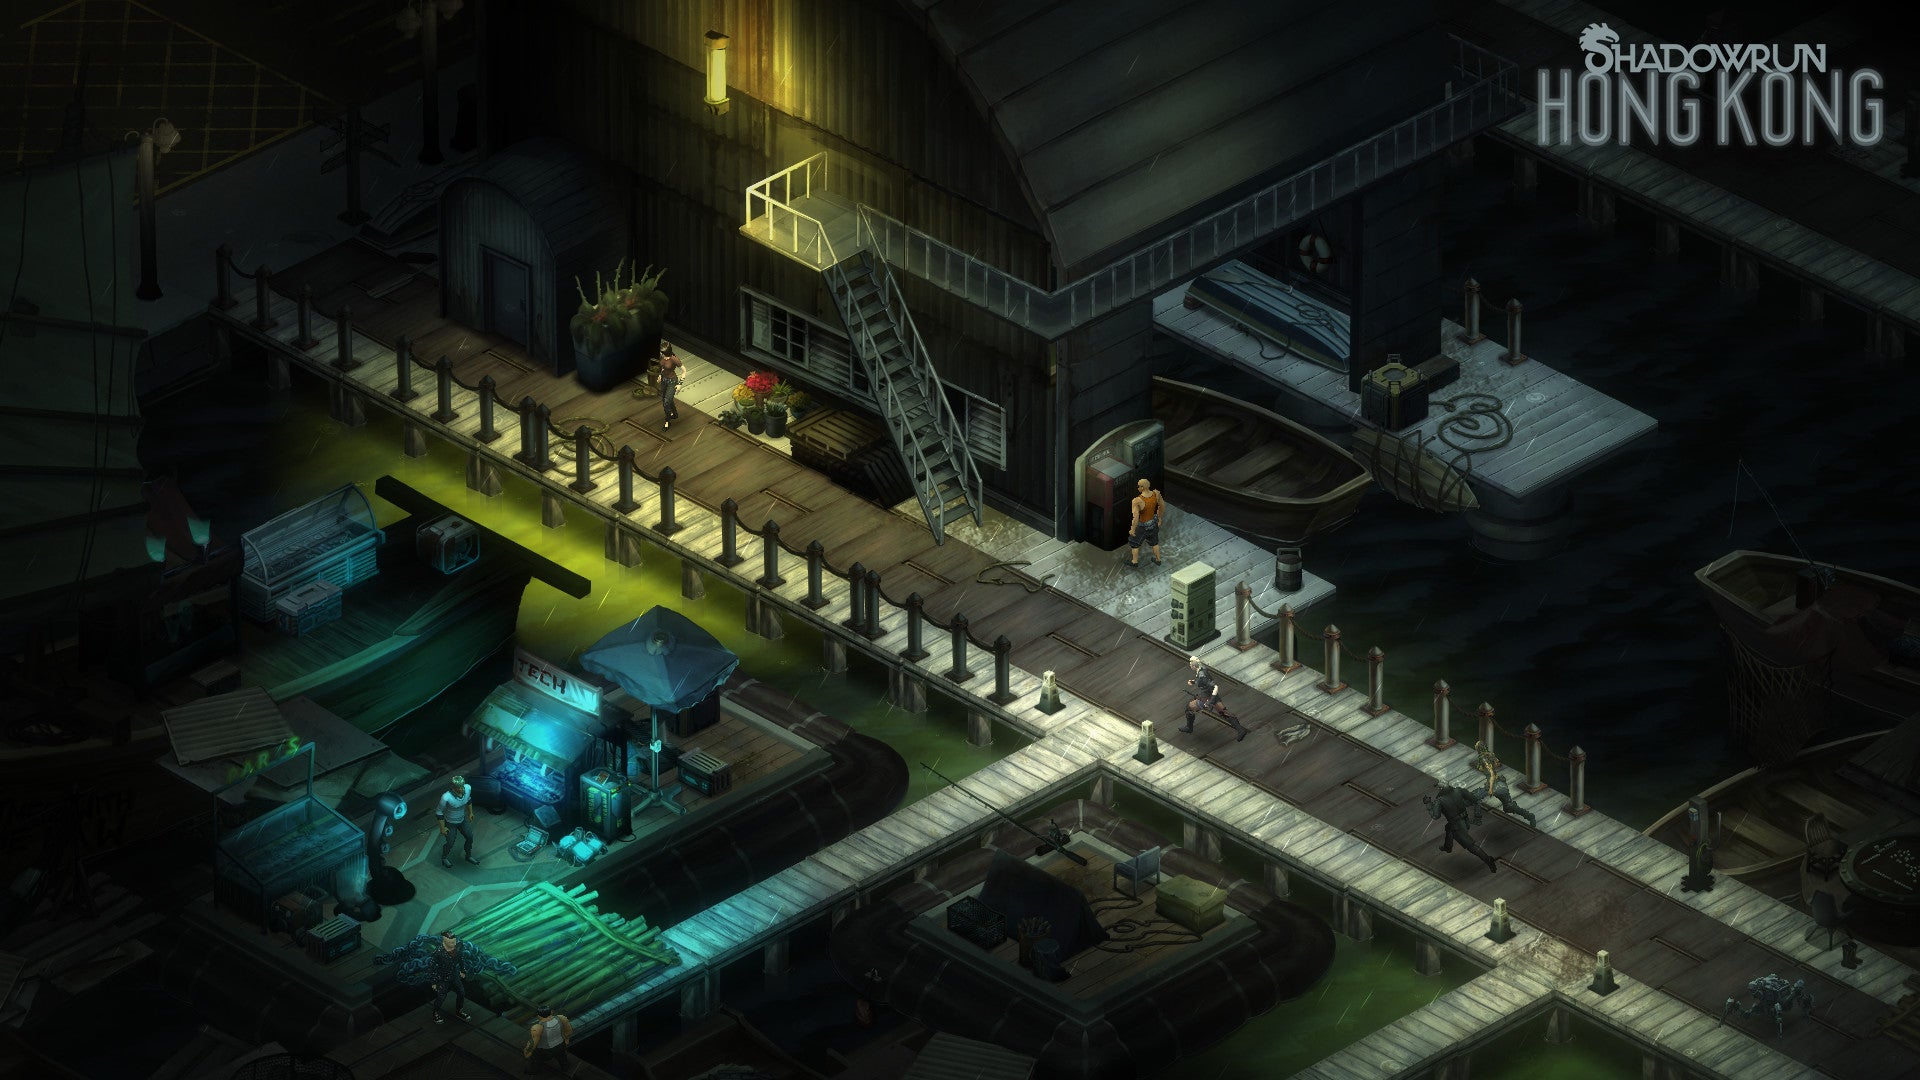 Image for This is our first look at Shadowrun: Hong Kong in action